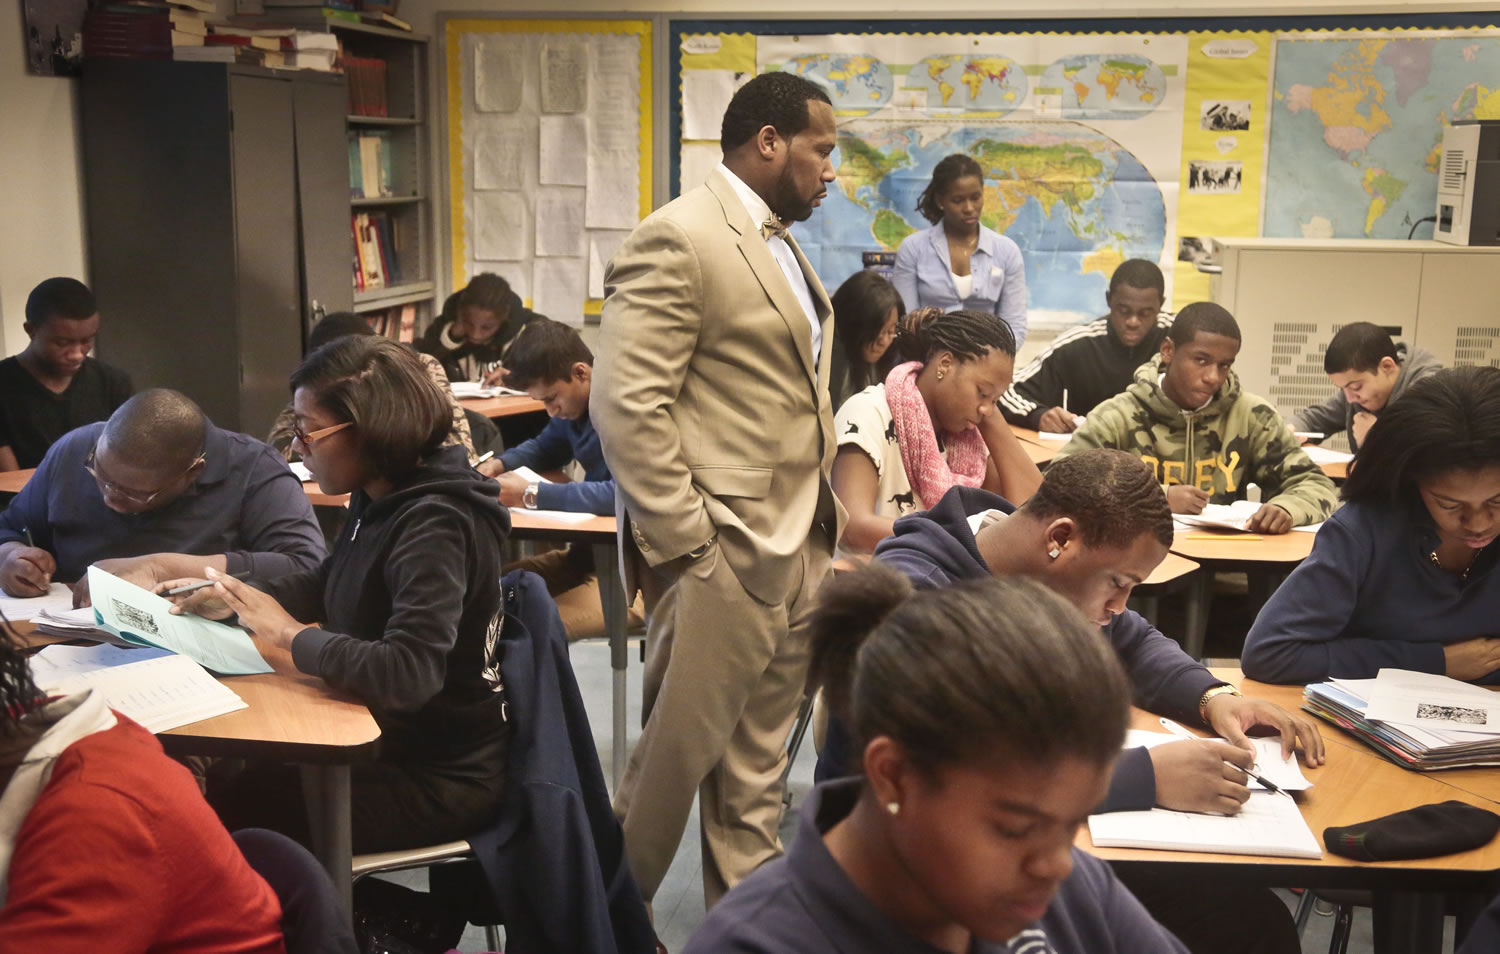 Adofo Muhammad, center, principal of Bedford Academy High School, teaches 10th and 11th graders in his Global Studies class in the Brooklyn Borough of New York in December. New York state has the most segregated public schools in the nation, with many black and Latino students attending schools with virtually no white classmates, according to a report released Wednesday, March 26, 2014, by the Civil Rights Project at the University of California at Los Angeles.